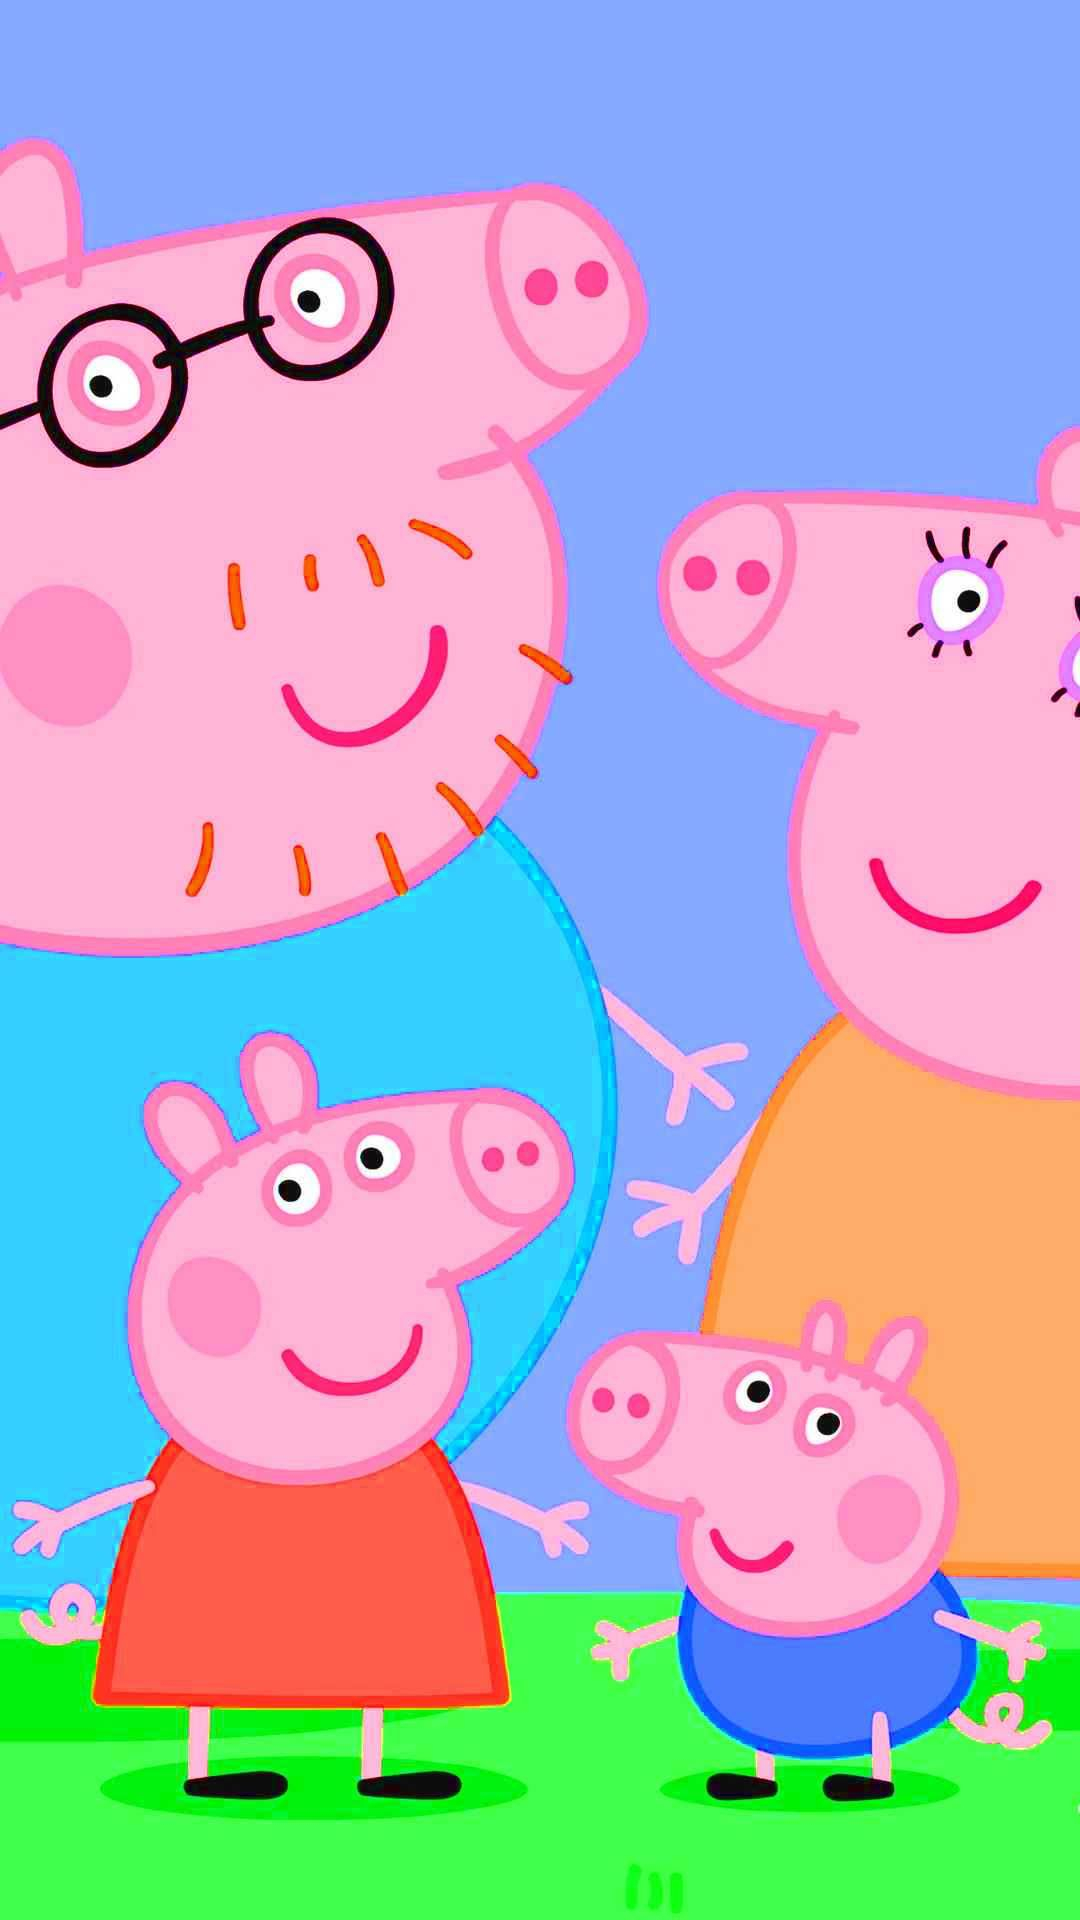 1080x1920 Background Peppa Pig House Wallpaper Discover more Animated, British, Peppa Pig House, Preschool, Television Series&acirc;&#128;&brvbar; in 2022 | Peppa pig wallpaper, Pig wallpaper, Pig house